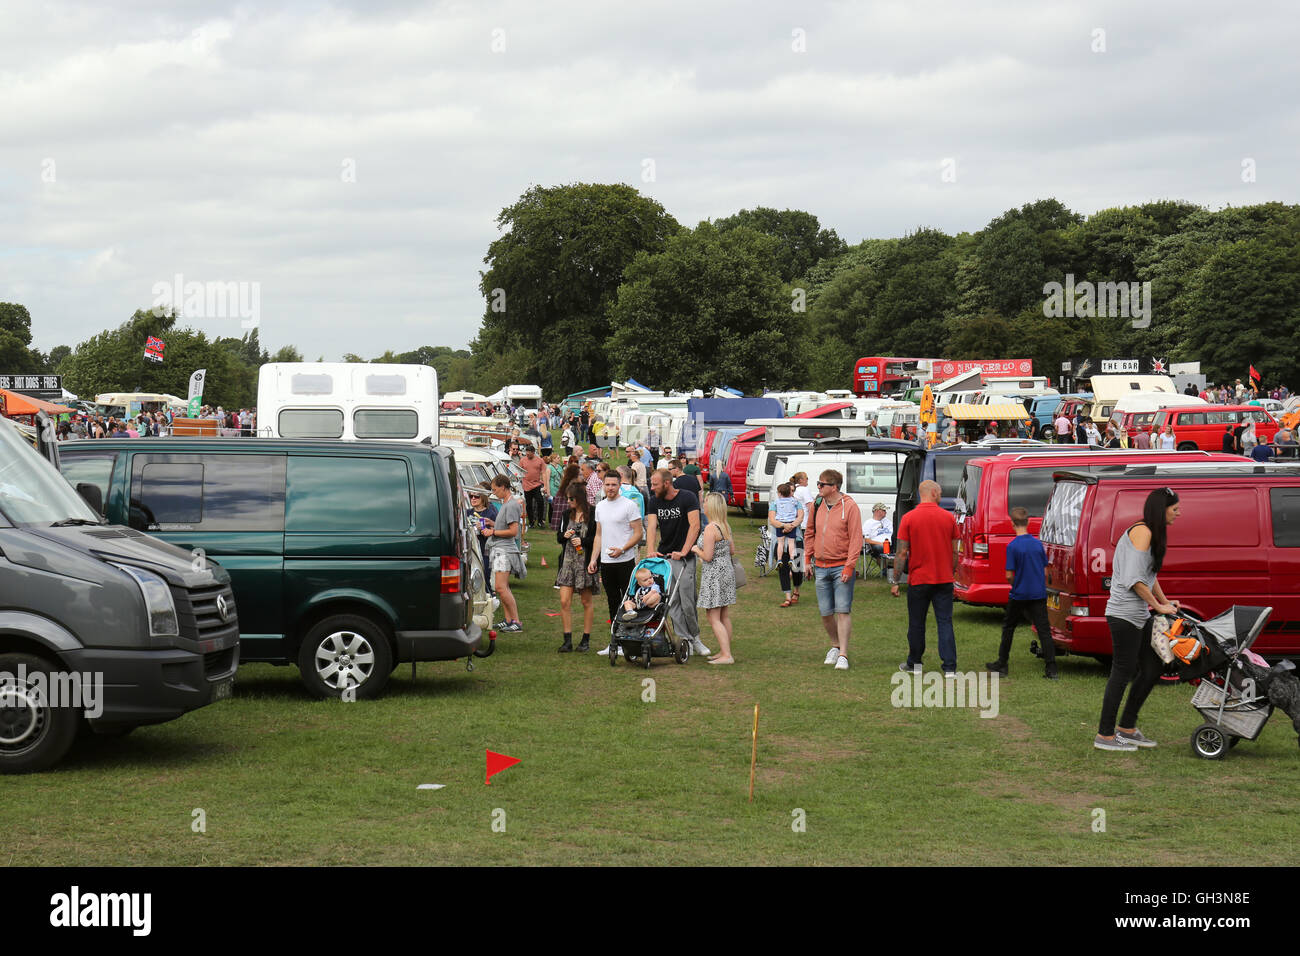 People enjoying a day out at Tatton park Vw show Stock Photo